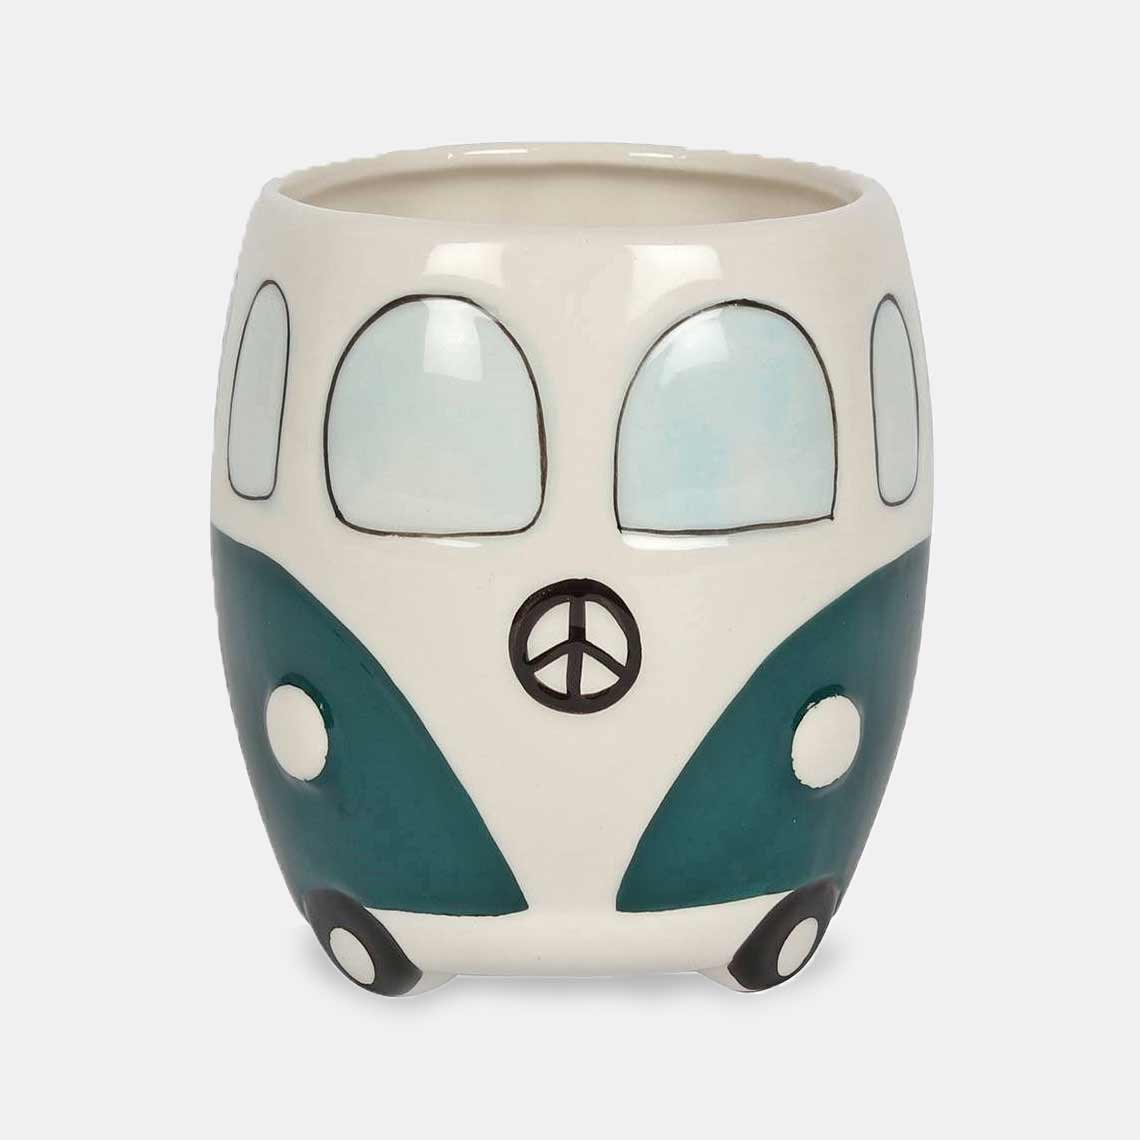 Campervan Novelty Mug in Dark Green and Pale Pink - Mugs and Cups by Jones Home & Gifts